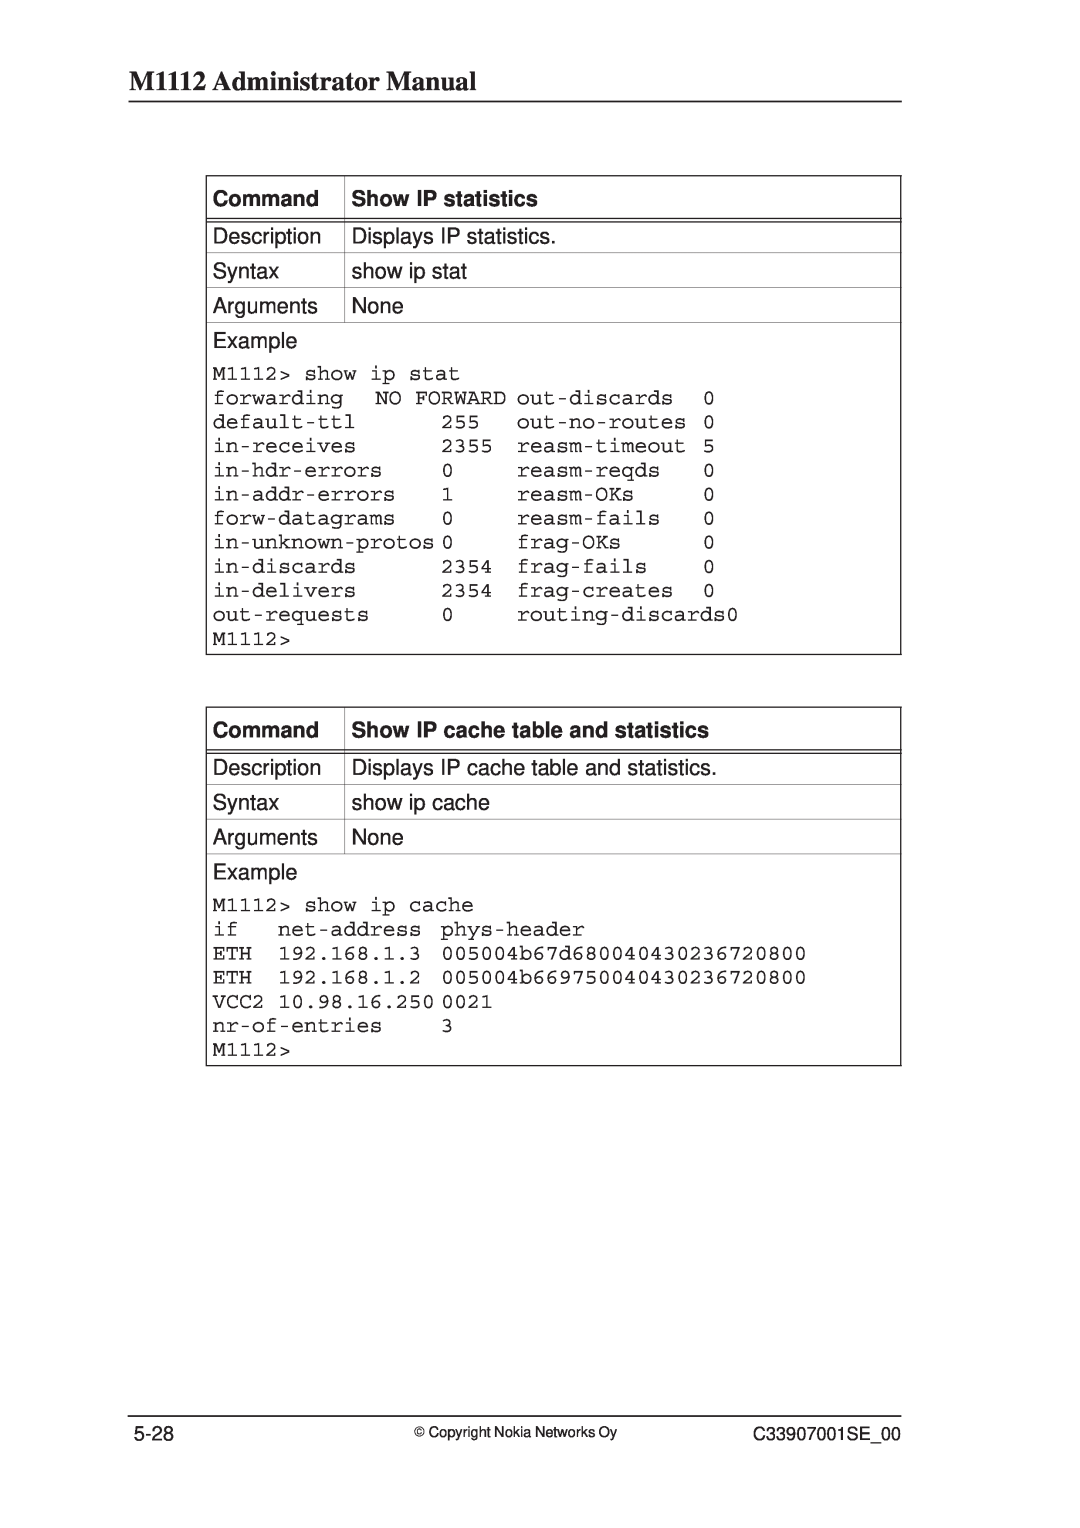 Nokia manual M1112 Administrator Manual, Command, Show IP statistics, Show IP cache table and statistics 